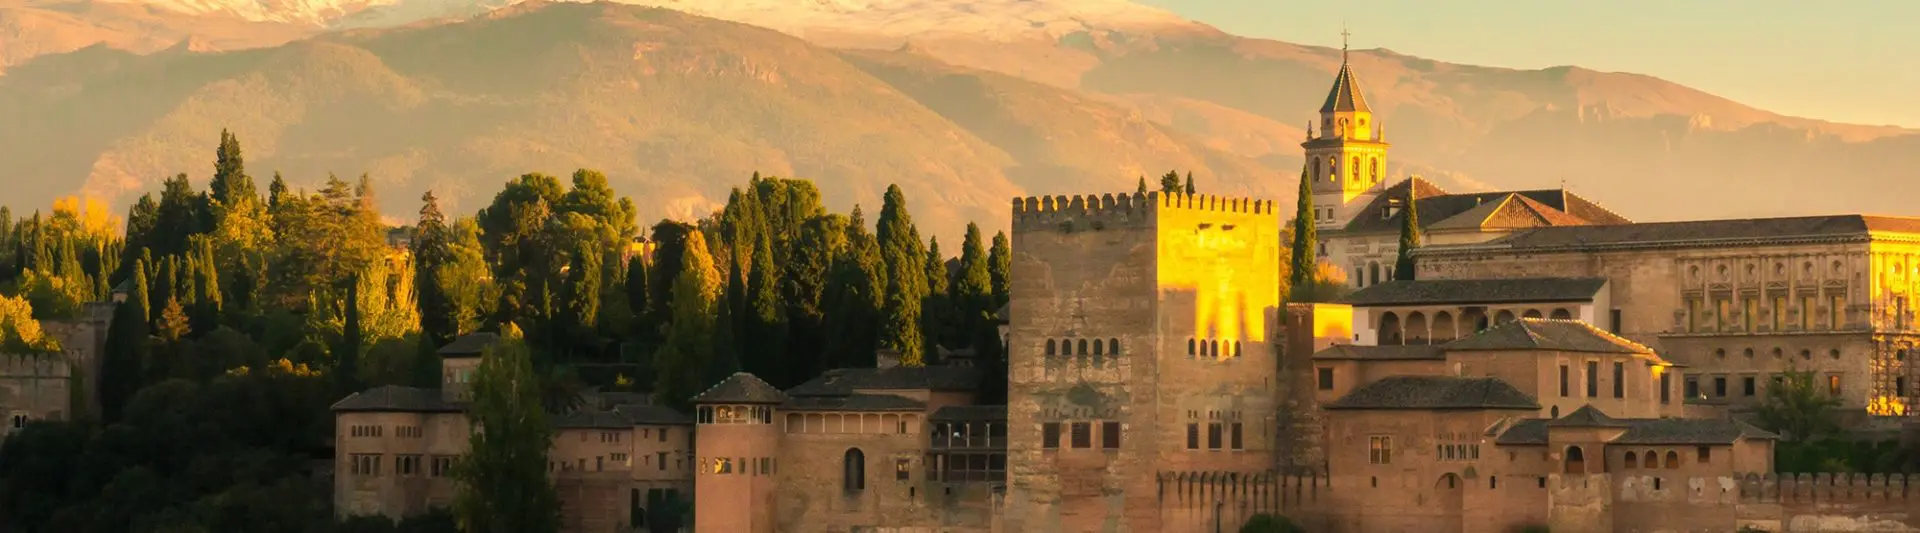 Splendid Andalusian Alhambra palace continues to draw visitors